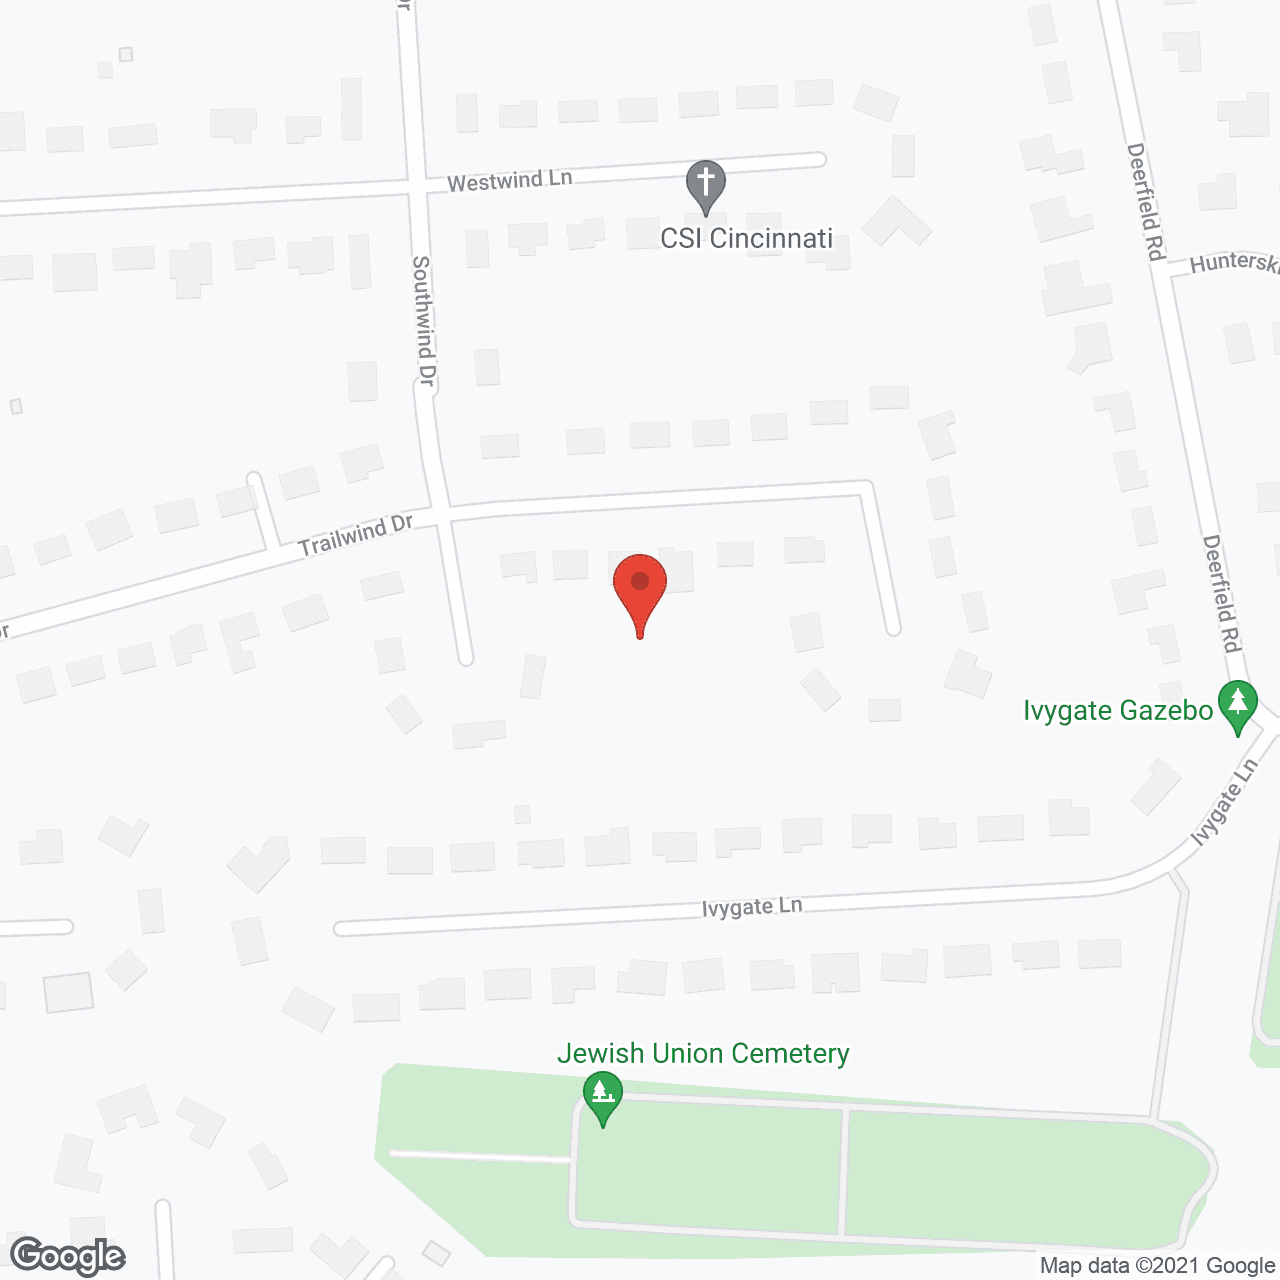 Heart to Heart Home Healthcare Services Agency LLC in google map